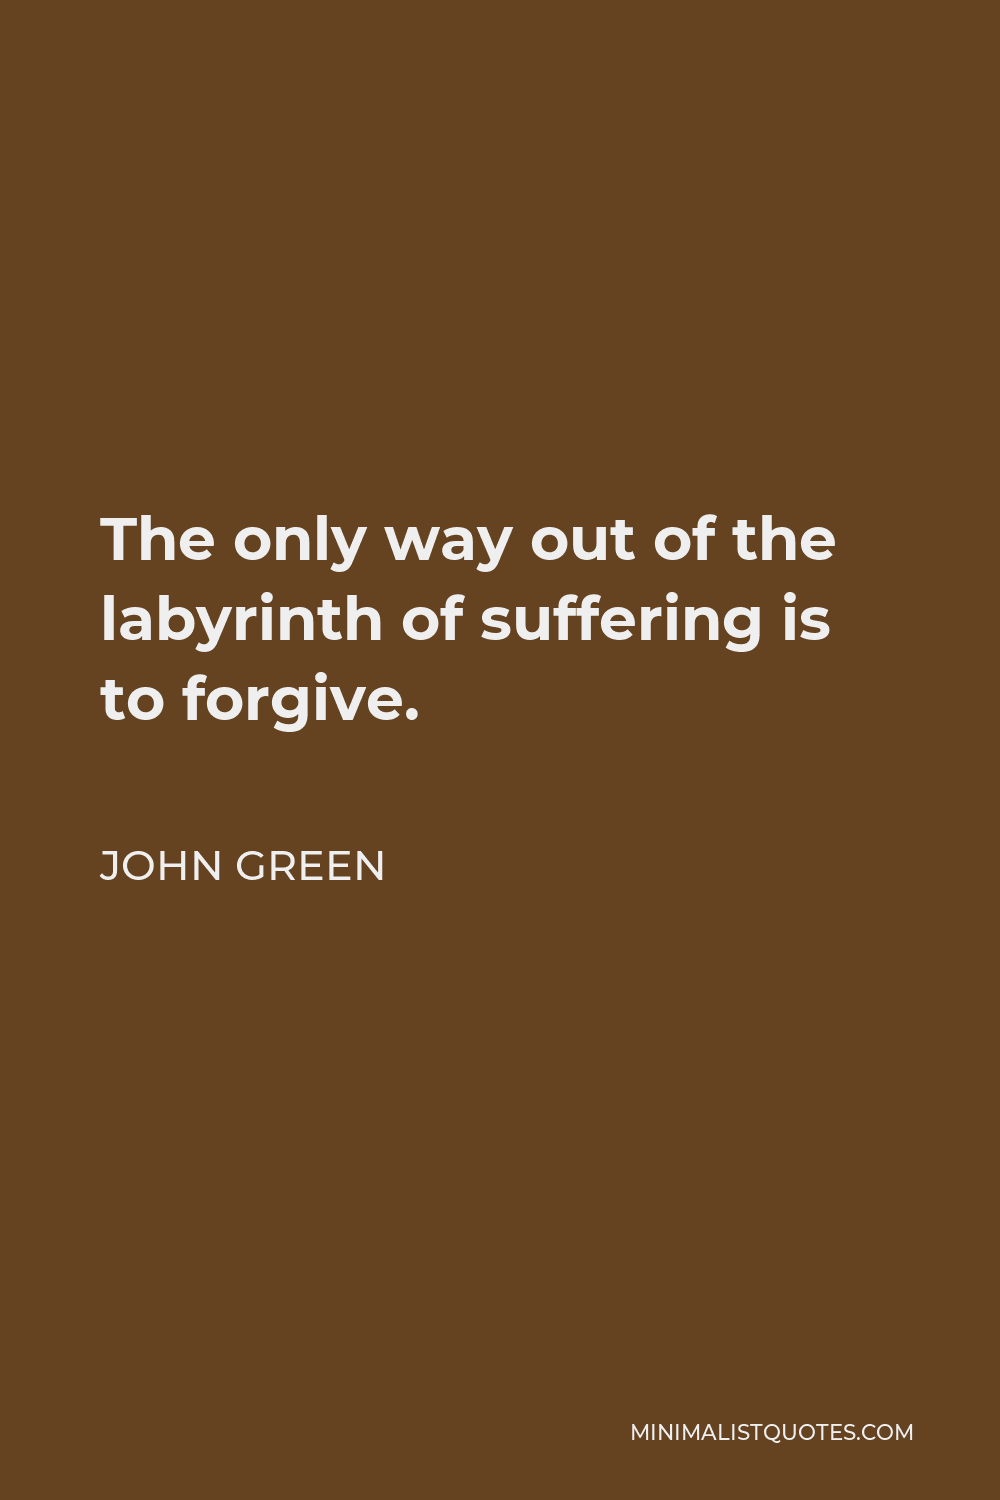 John Green Quote - The only way out of the labyrinth of suffering is to forgive.